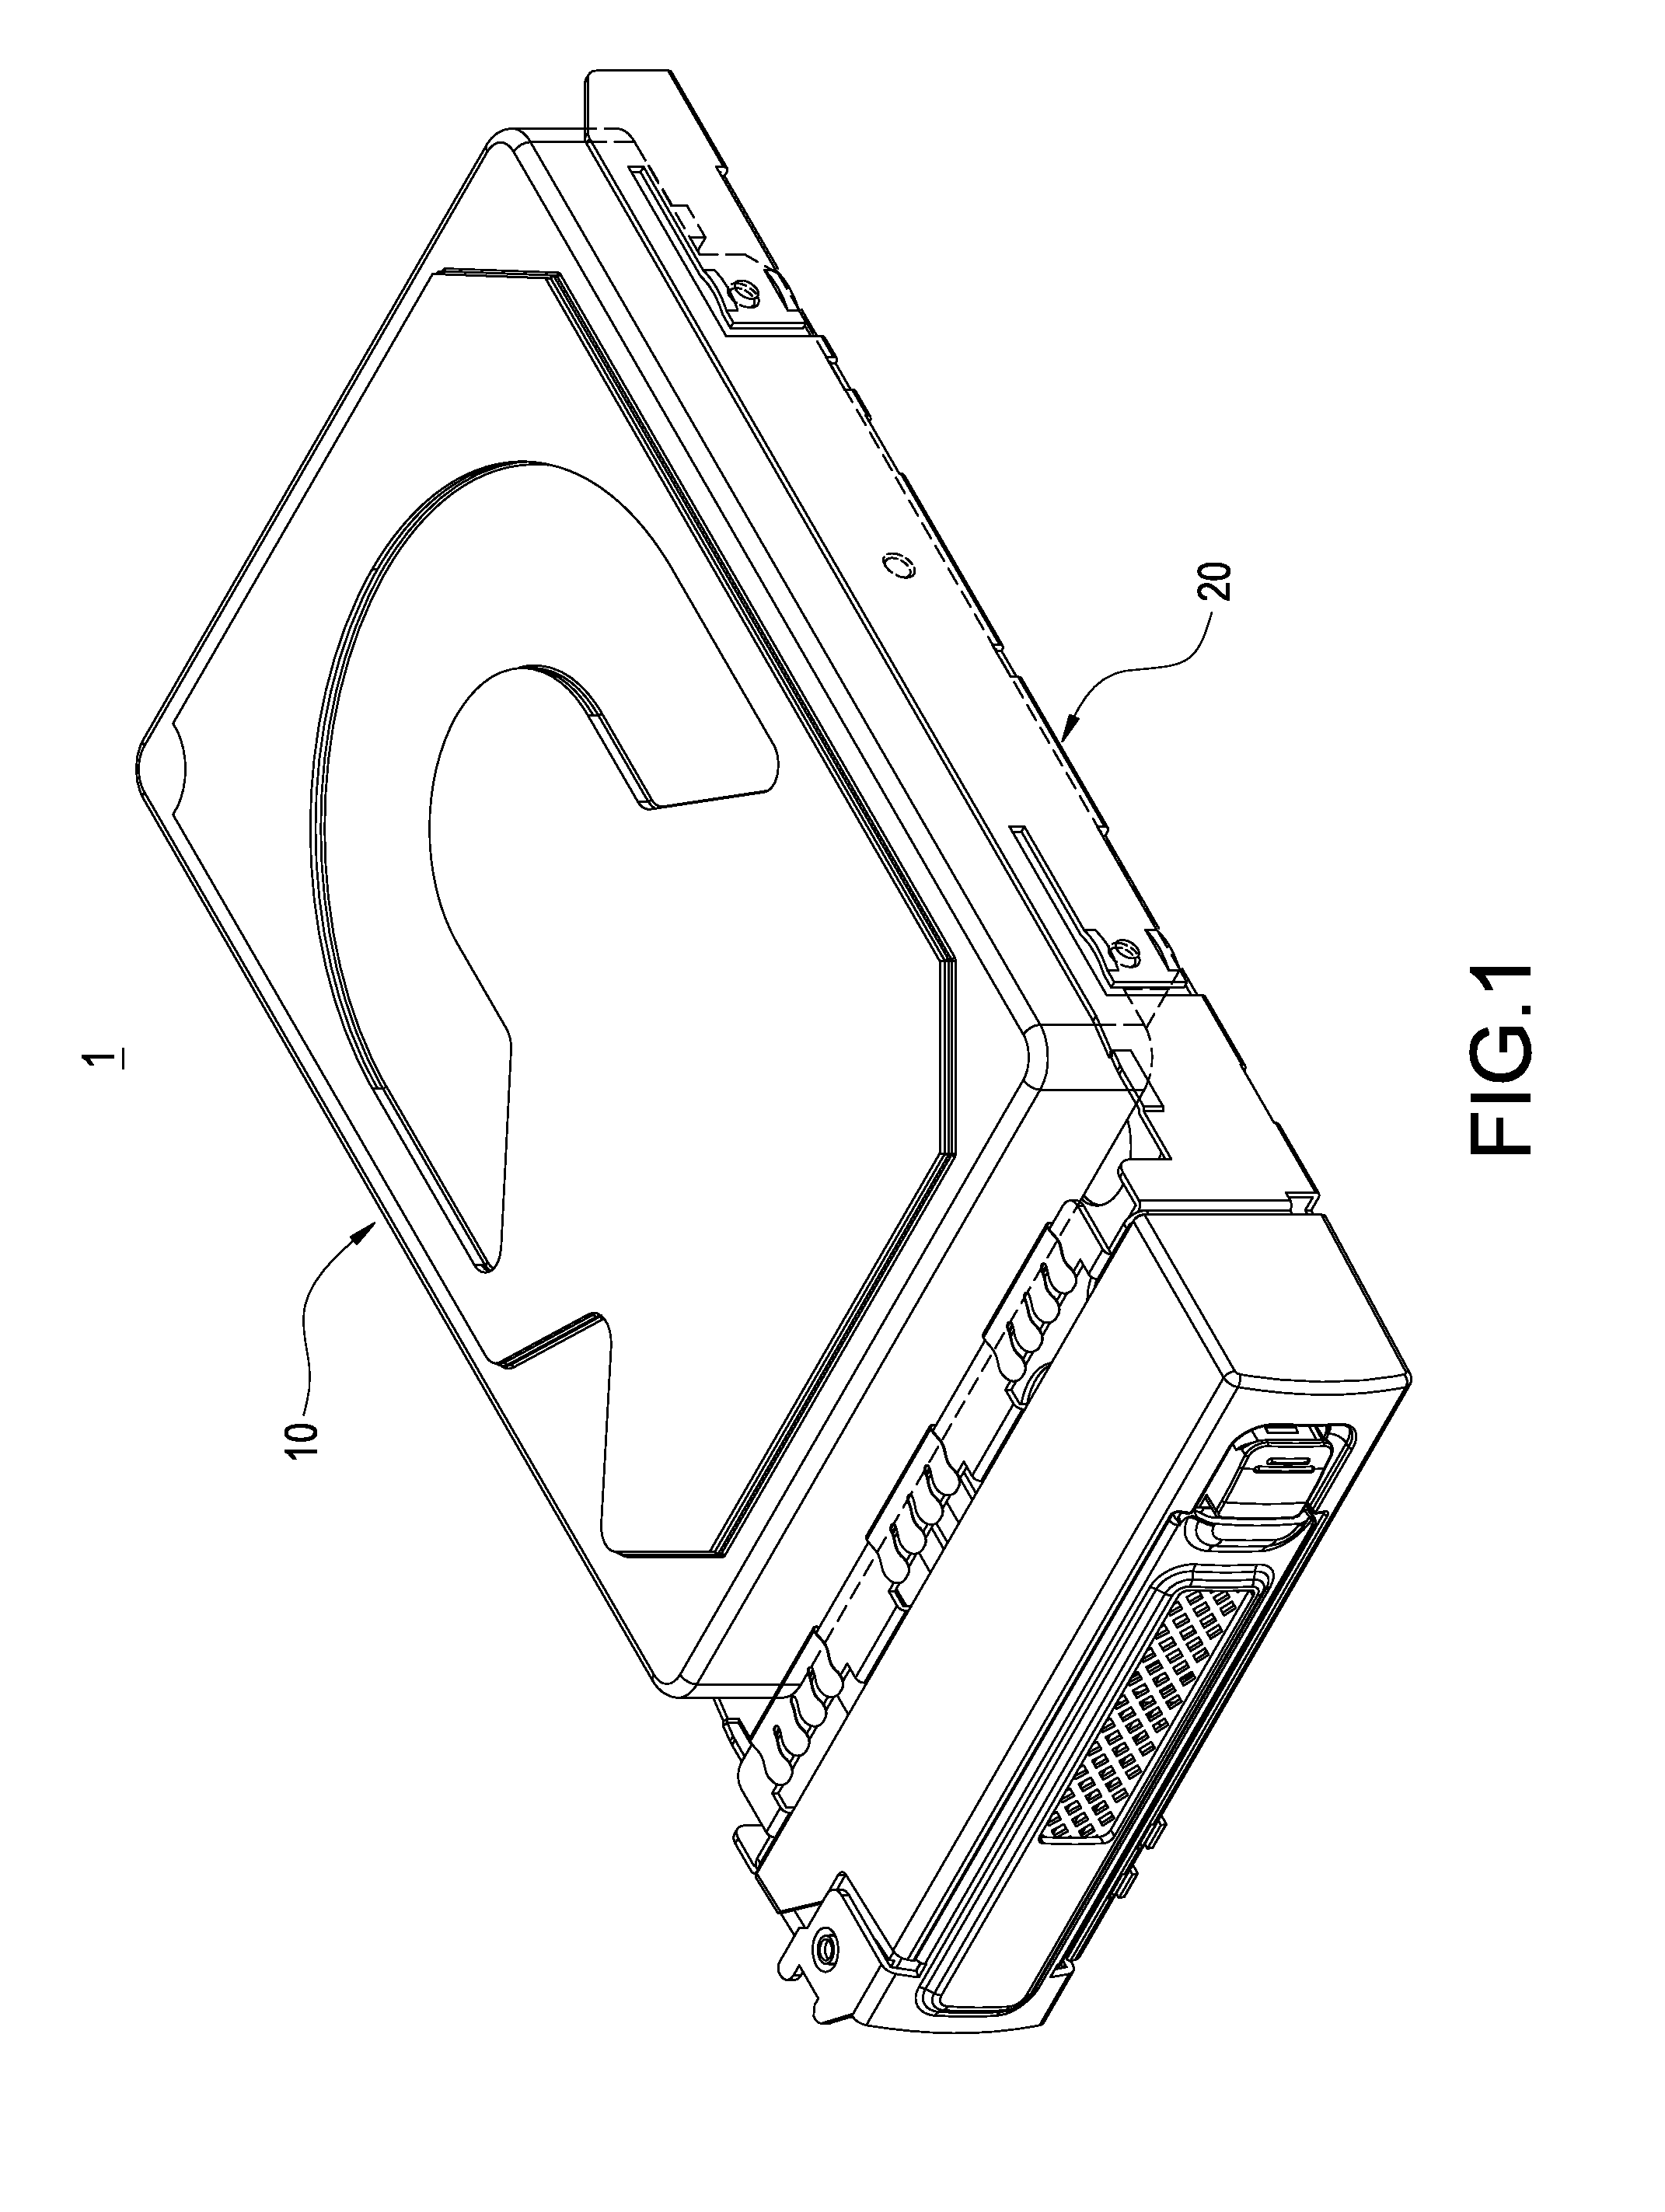 Positioning structure for removable hard drive